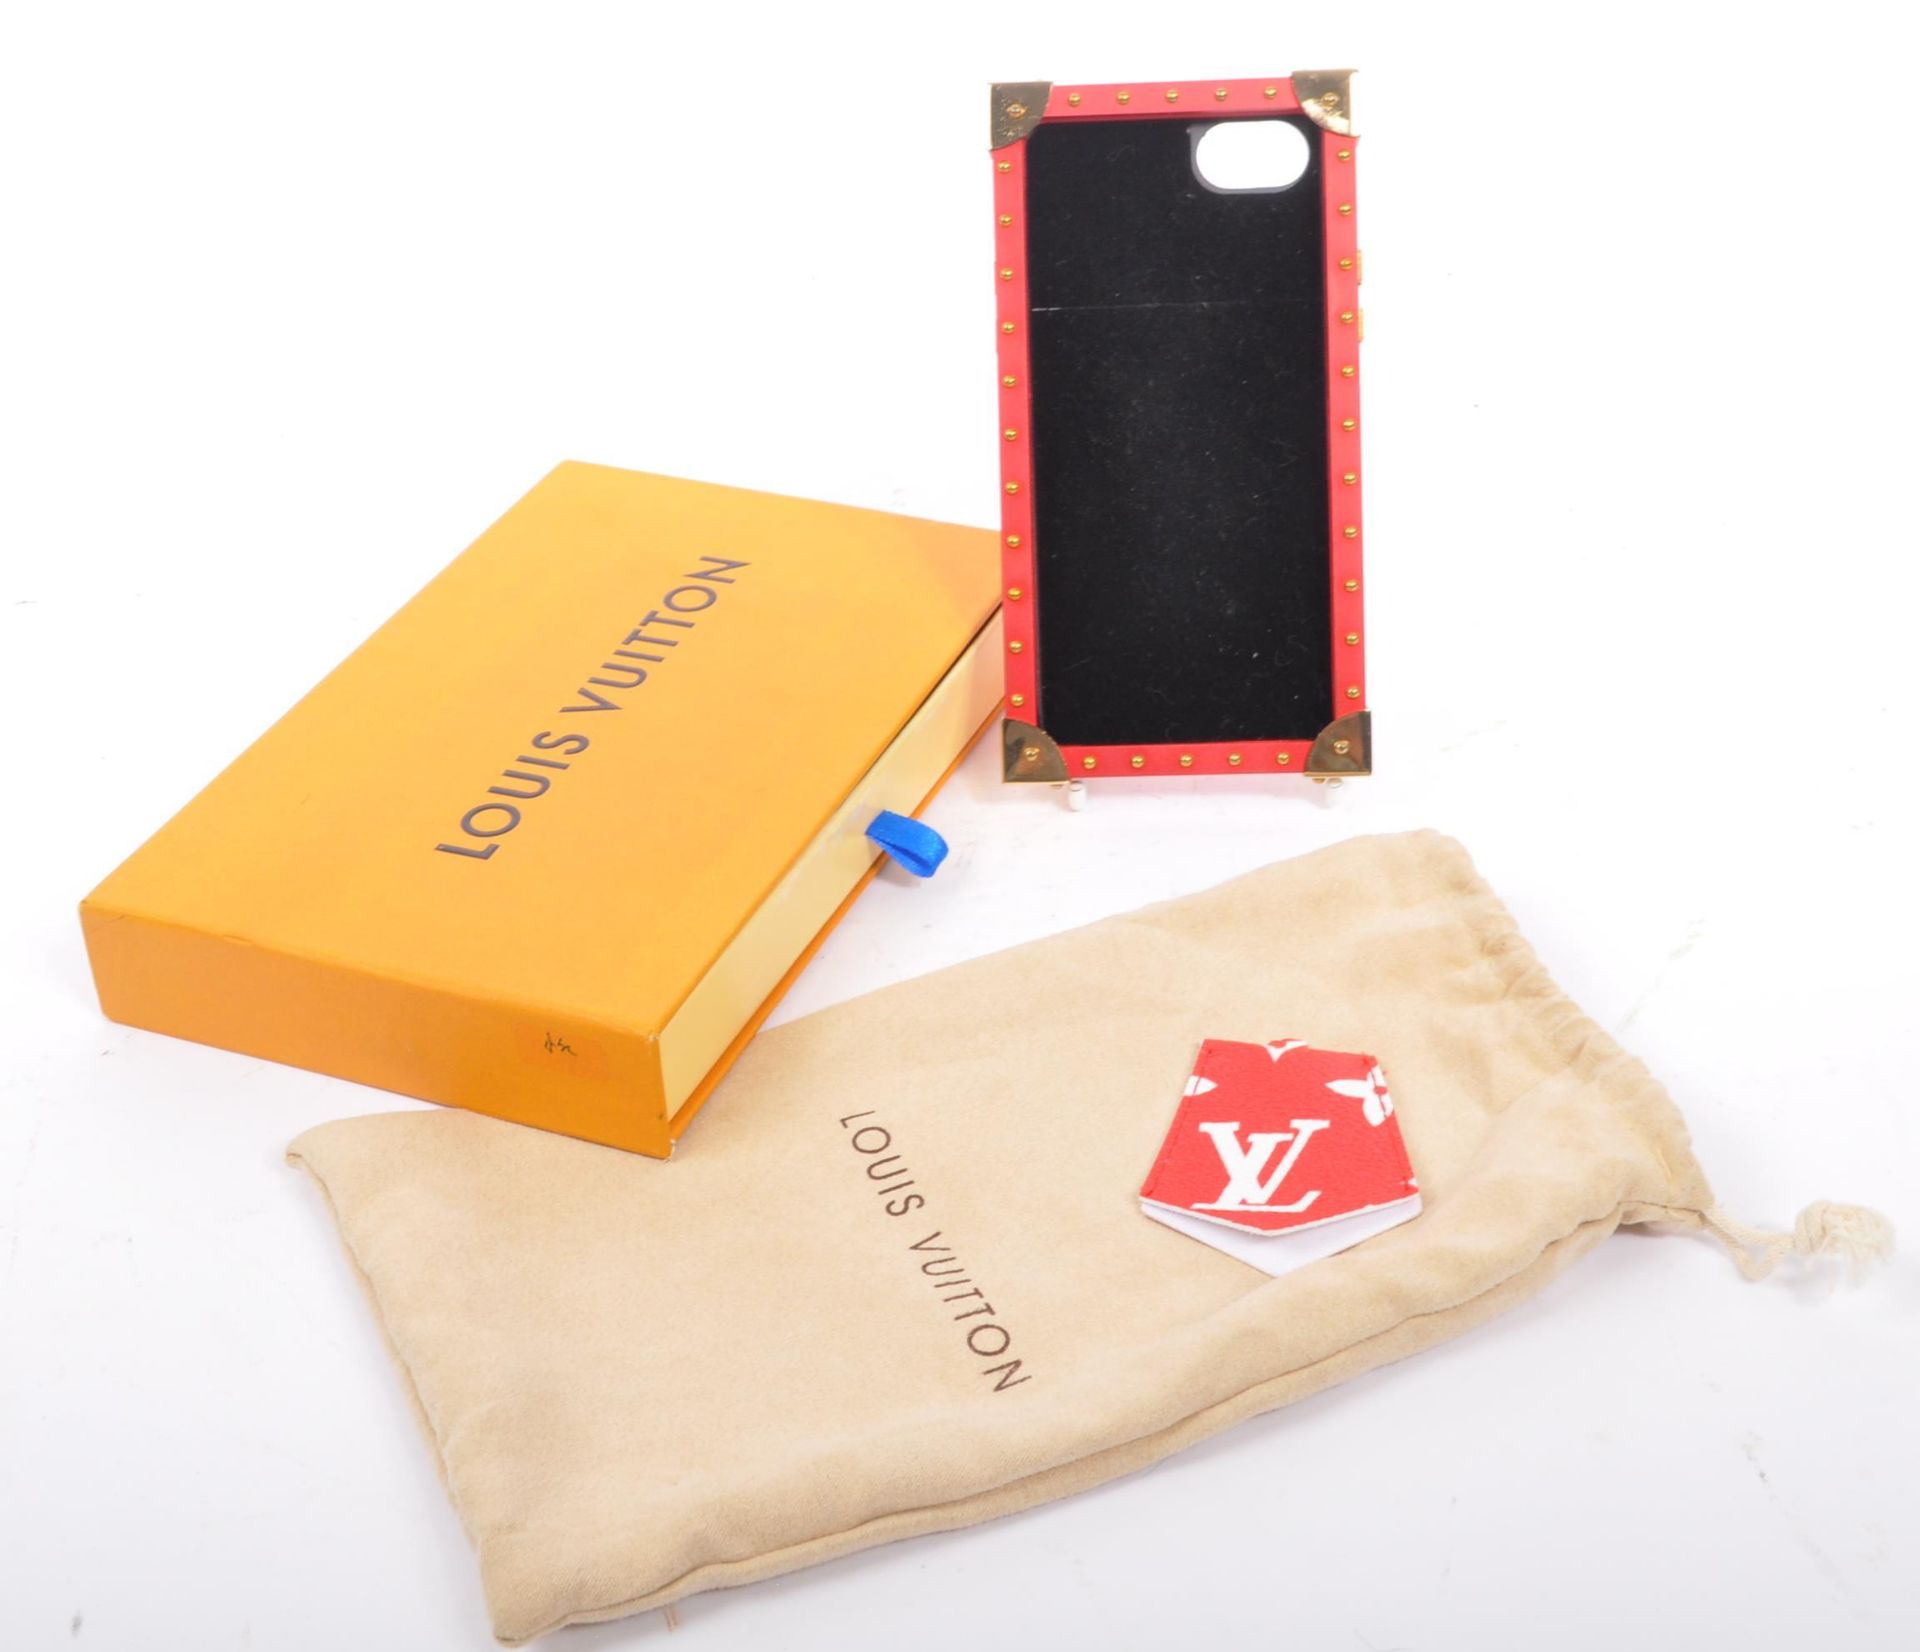 LOUIS VUITTON X SUPREME RED / GOLD IPHONE 7 CASE IN BOX